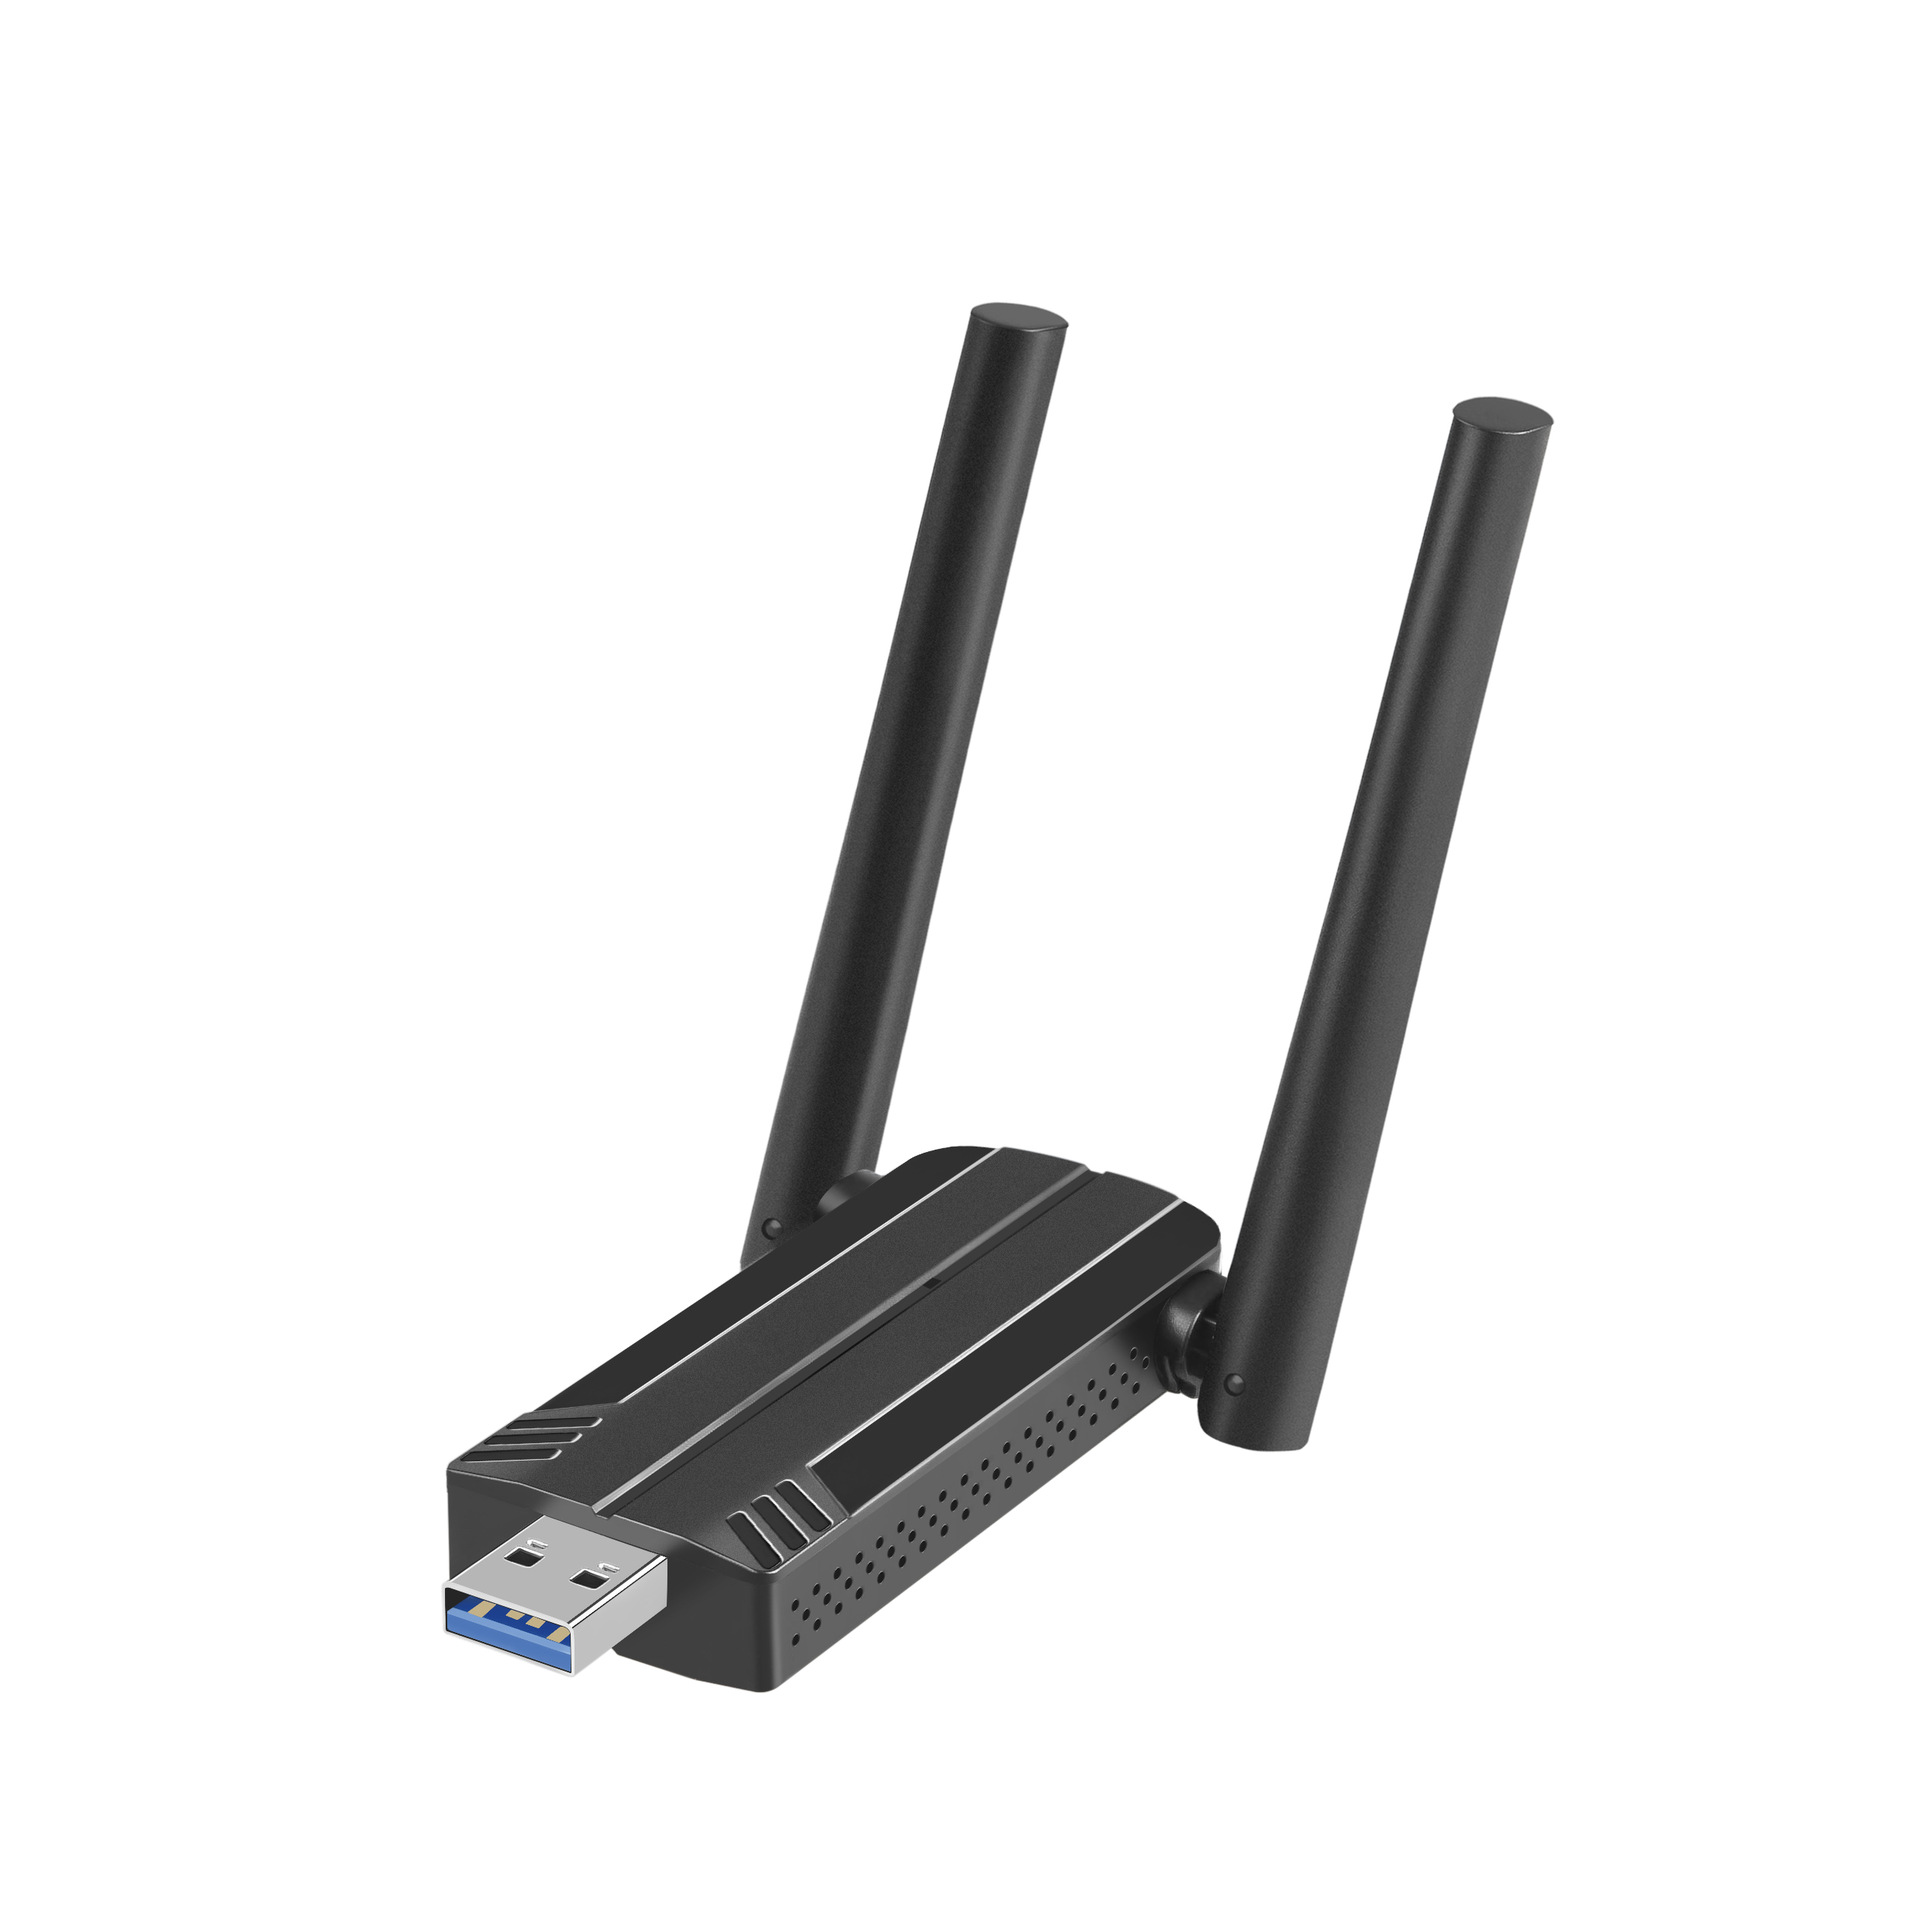 MT1808 AX3000 Wifi6 Dual-band Wireless Network Cards USB Wireless Dongle USB3.0 WiFi Receiver Transmitter 5G High-speed Network Card